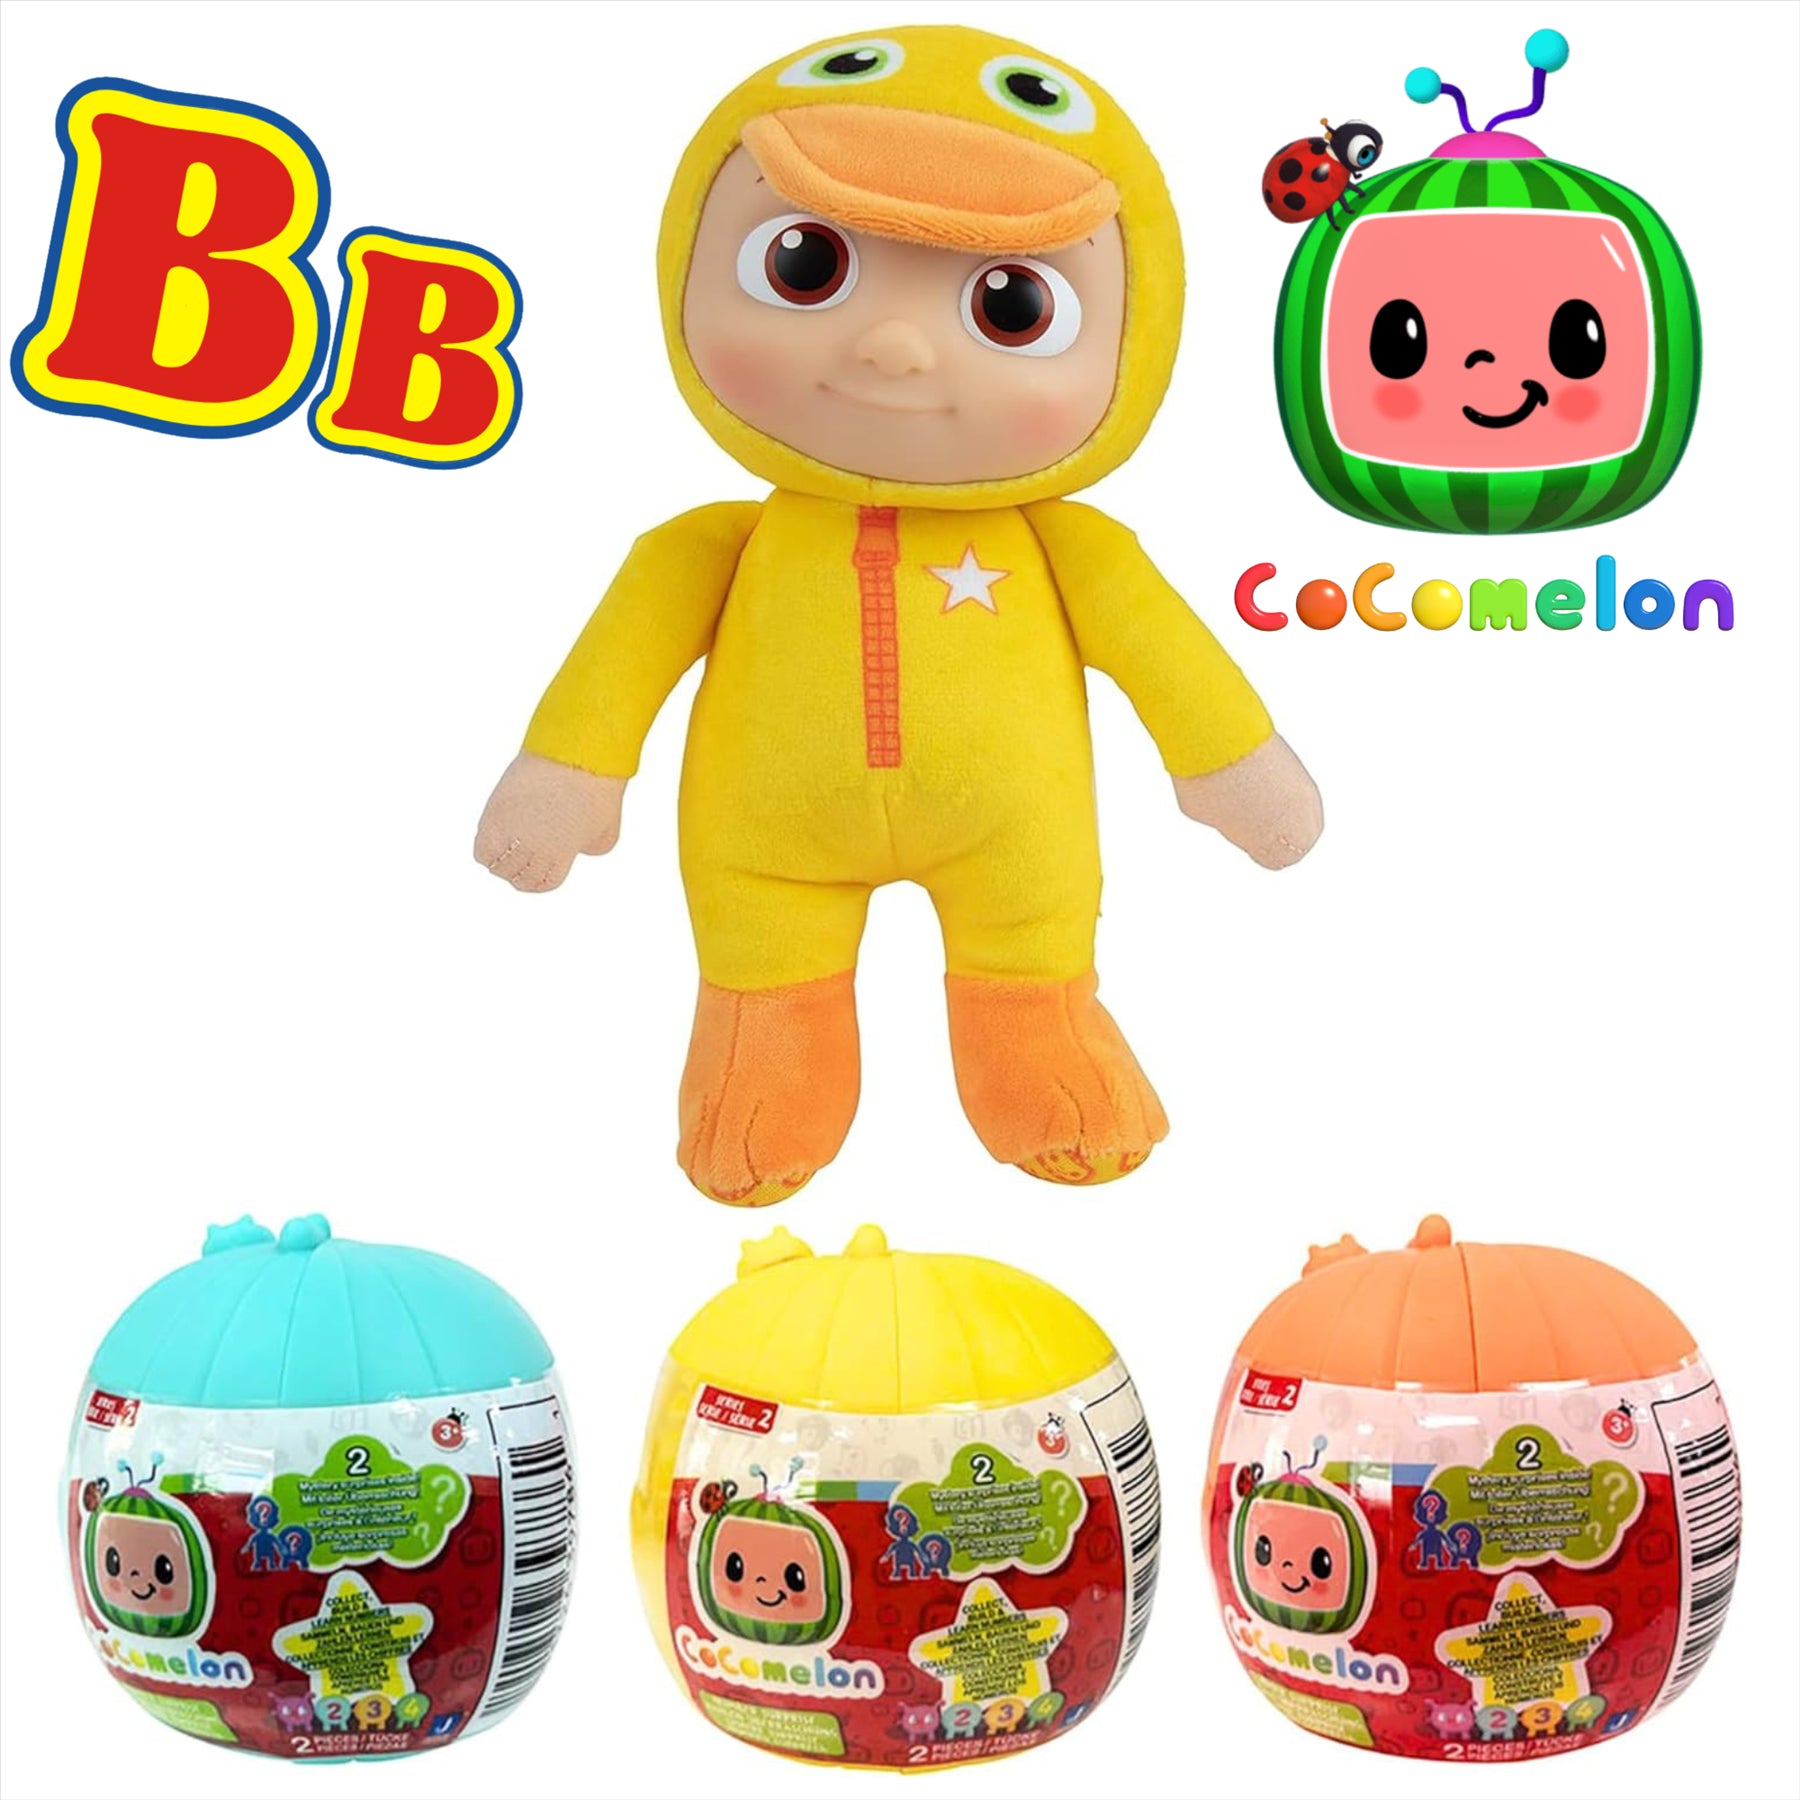 CoComelon Blind Capsule Number Character Articulated Figure Set - Duckie 20cm Plush and 3x Balls